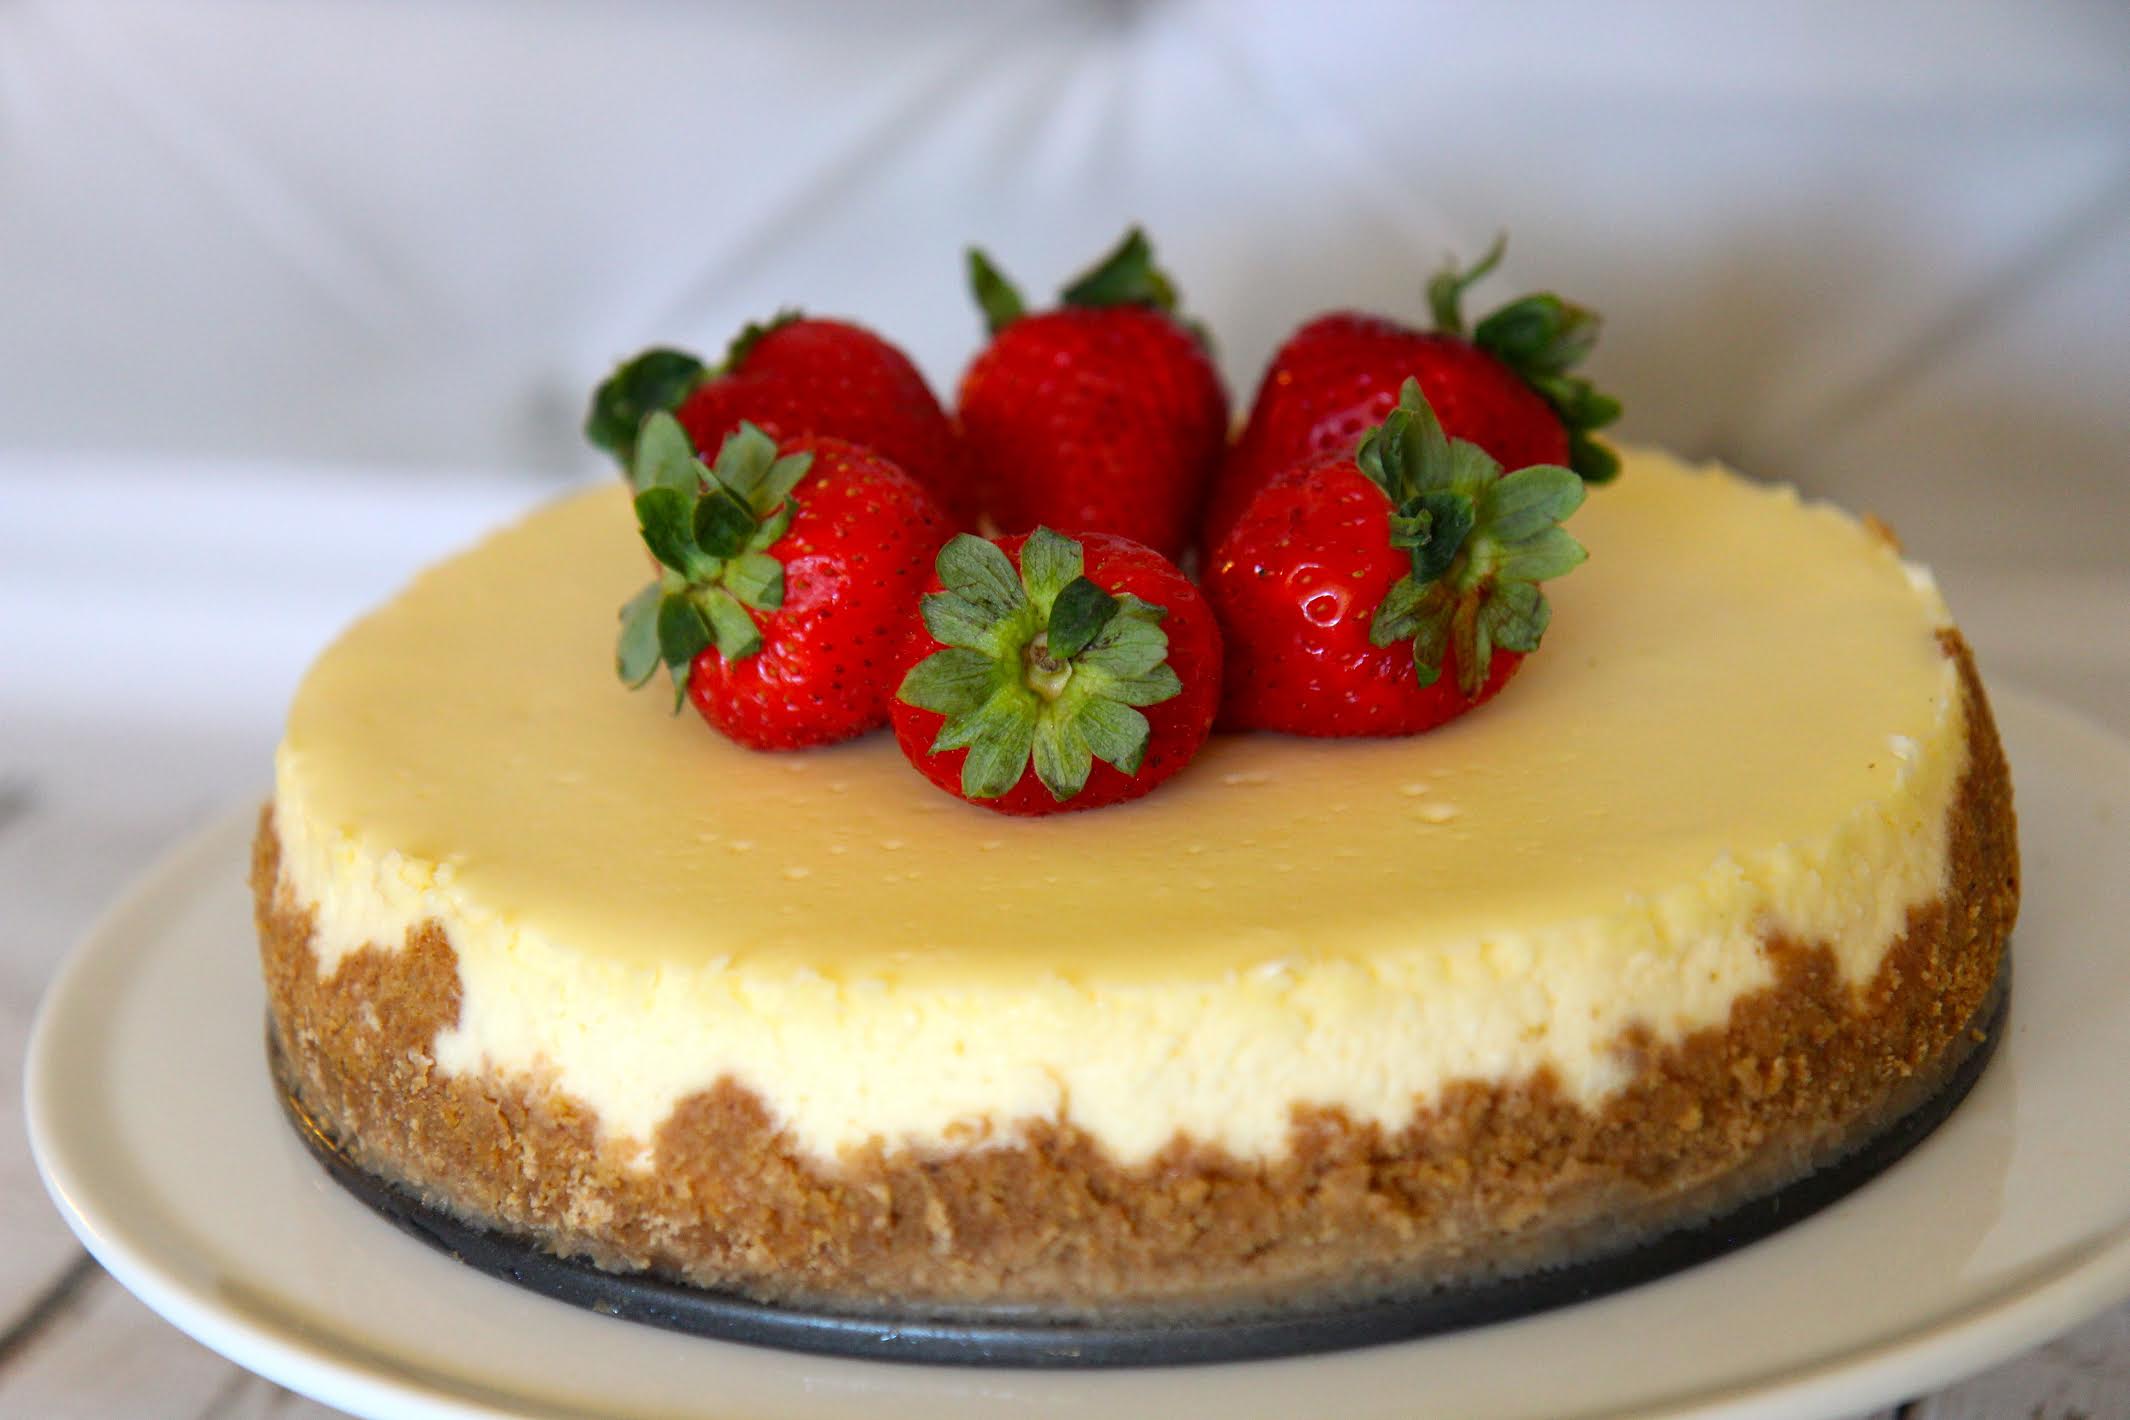 Plain Homemade cheesecake with a graham cracker crust and topped with strawberries.